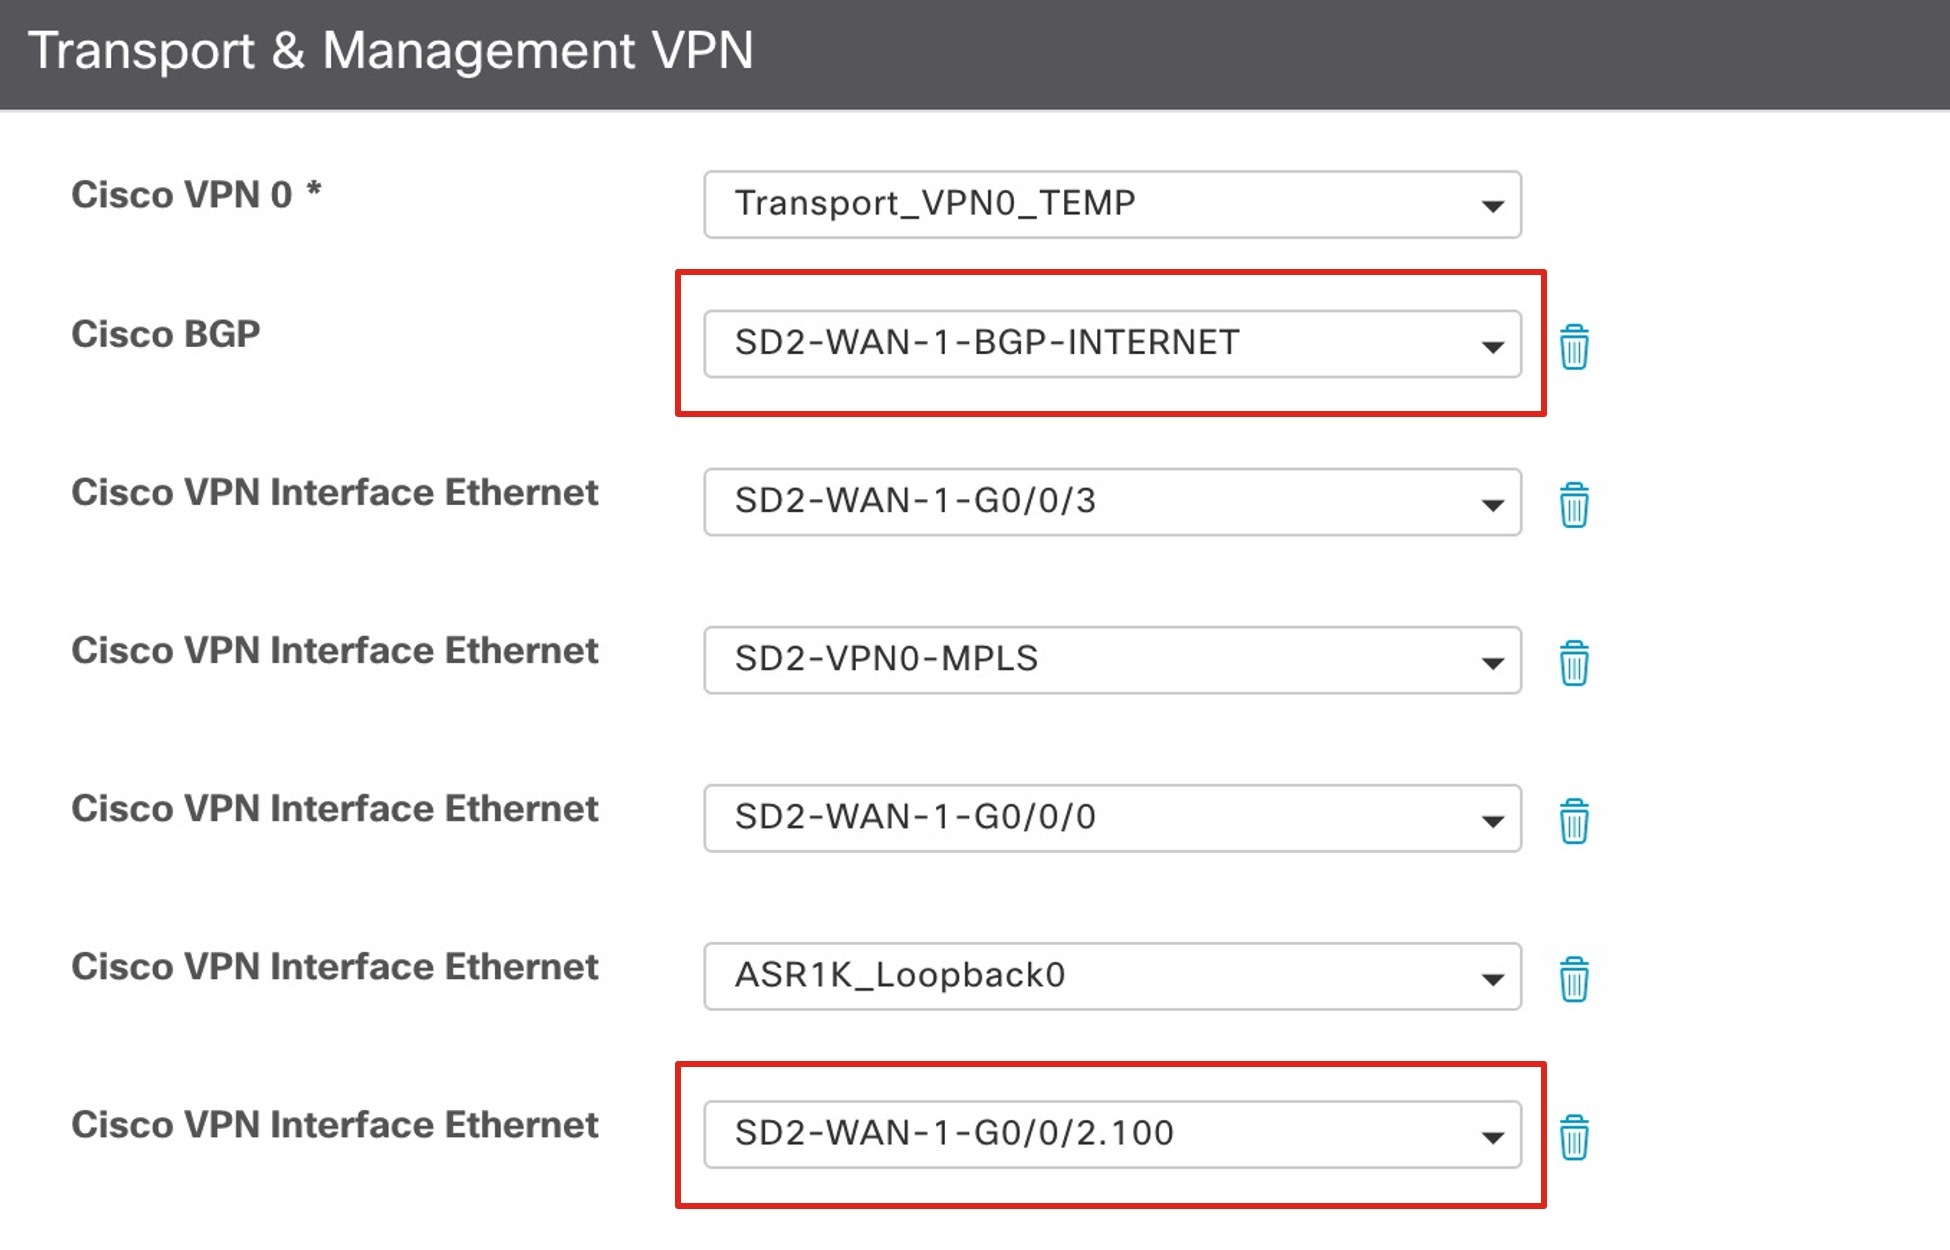 On the Cisco VPN Interface Ethernet template, in the Transport & Management VPN area, the Cisco BGP and Cisco VPN Interface Ethernet drop-down lists are listed.